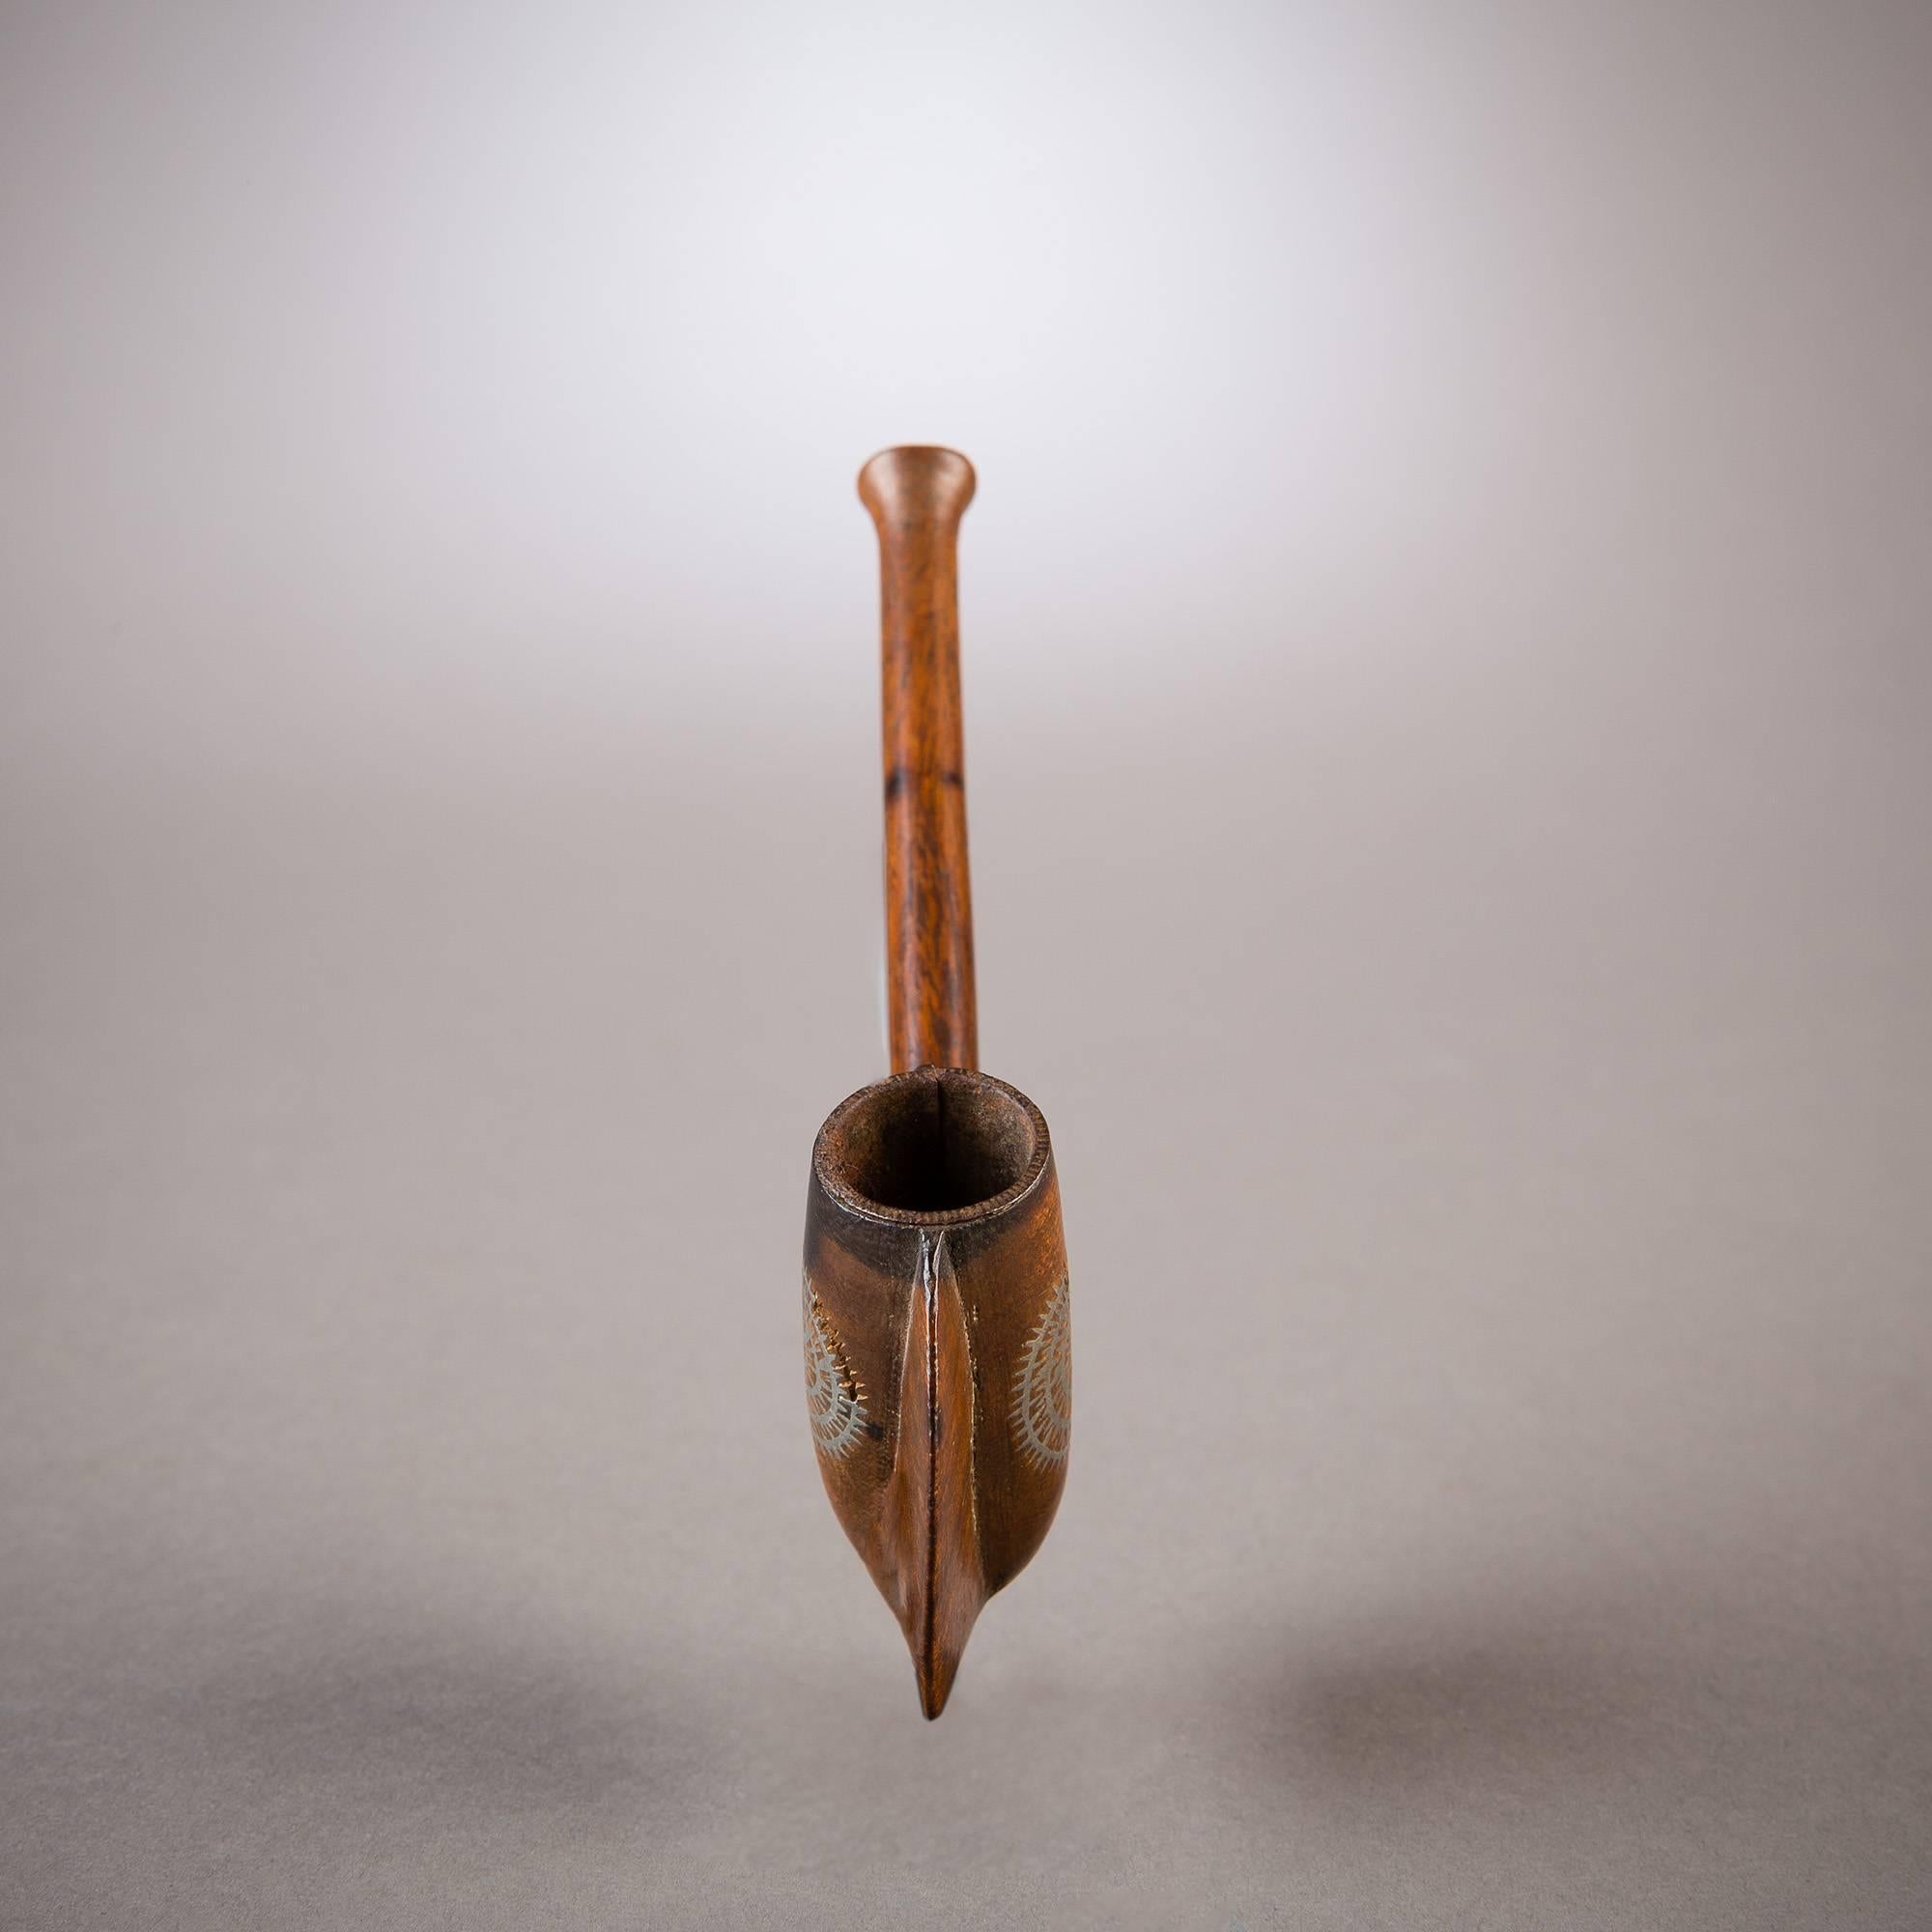 This disc-shaped pipe is a beautiful example of South African tobacco paraphernalia and an excellent example of the region's imaginative woodworking tradition. The stem merges seamlessly with the large, thin disc that describes a dramatic halo